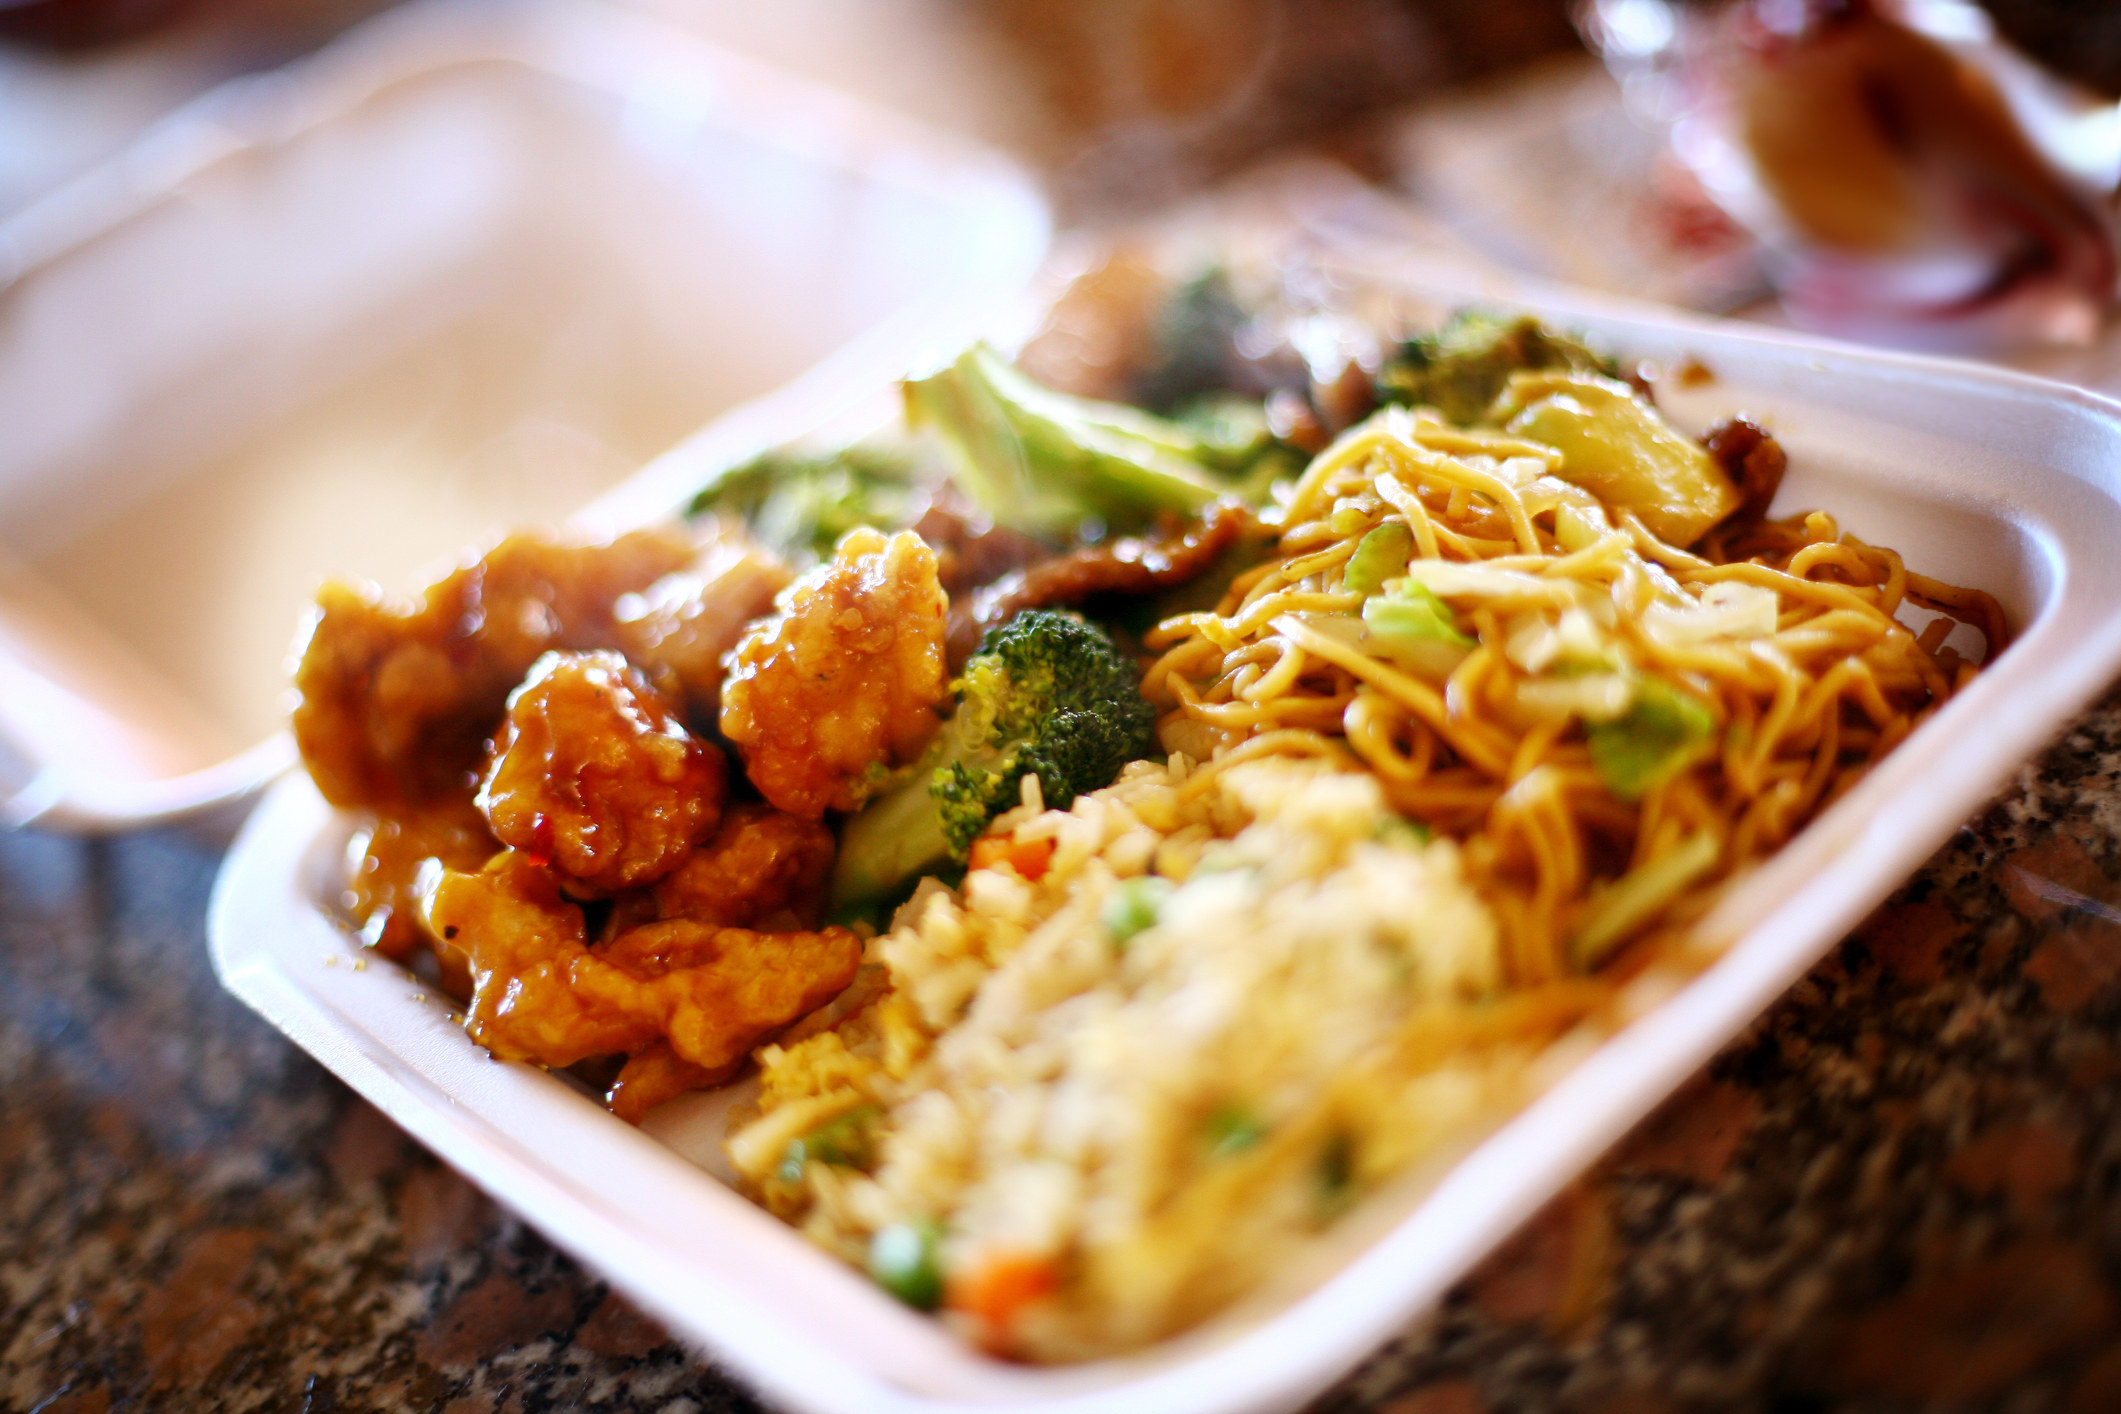 A platter of Chinese food in a takeout container